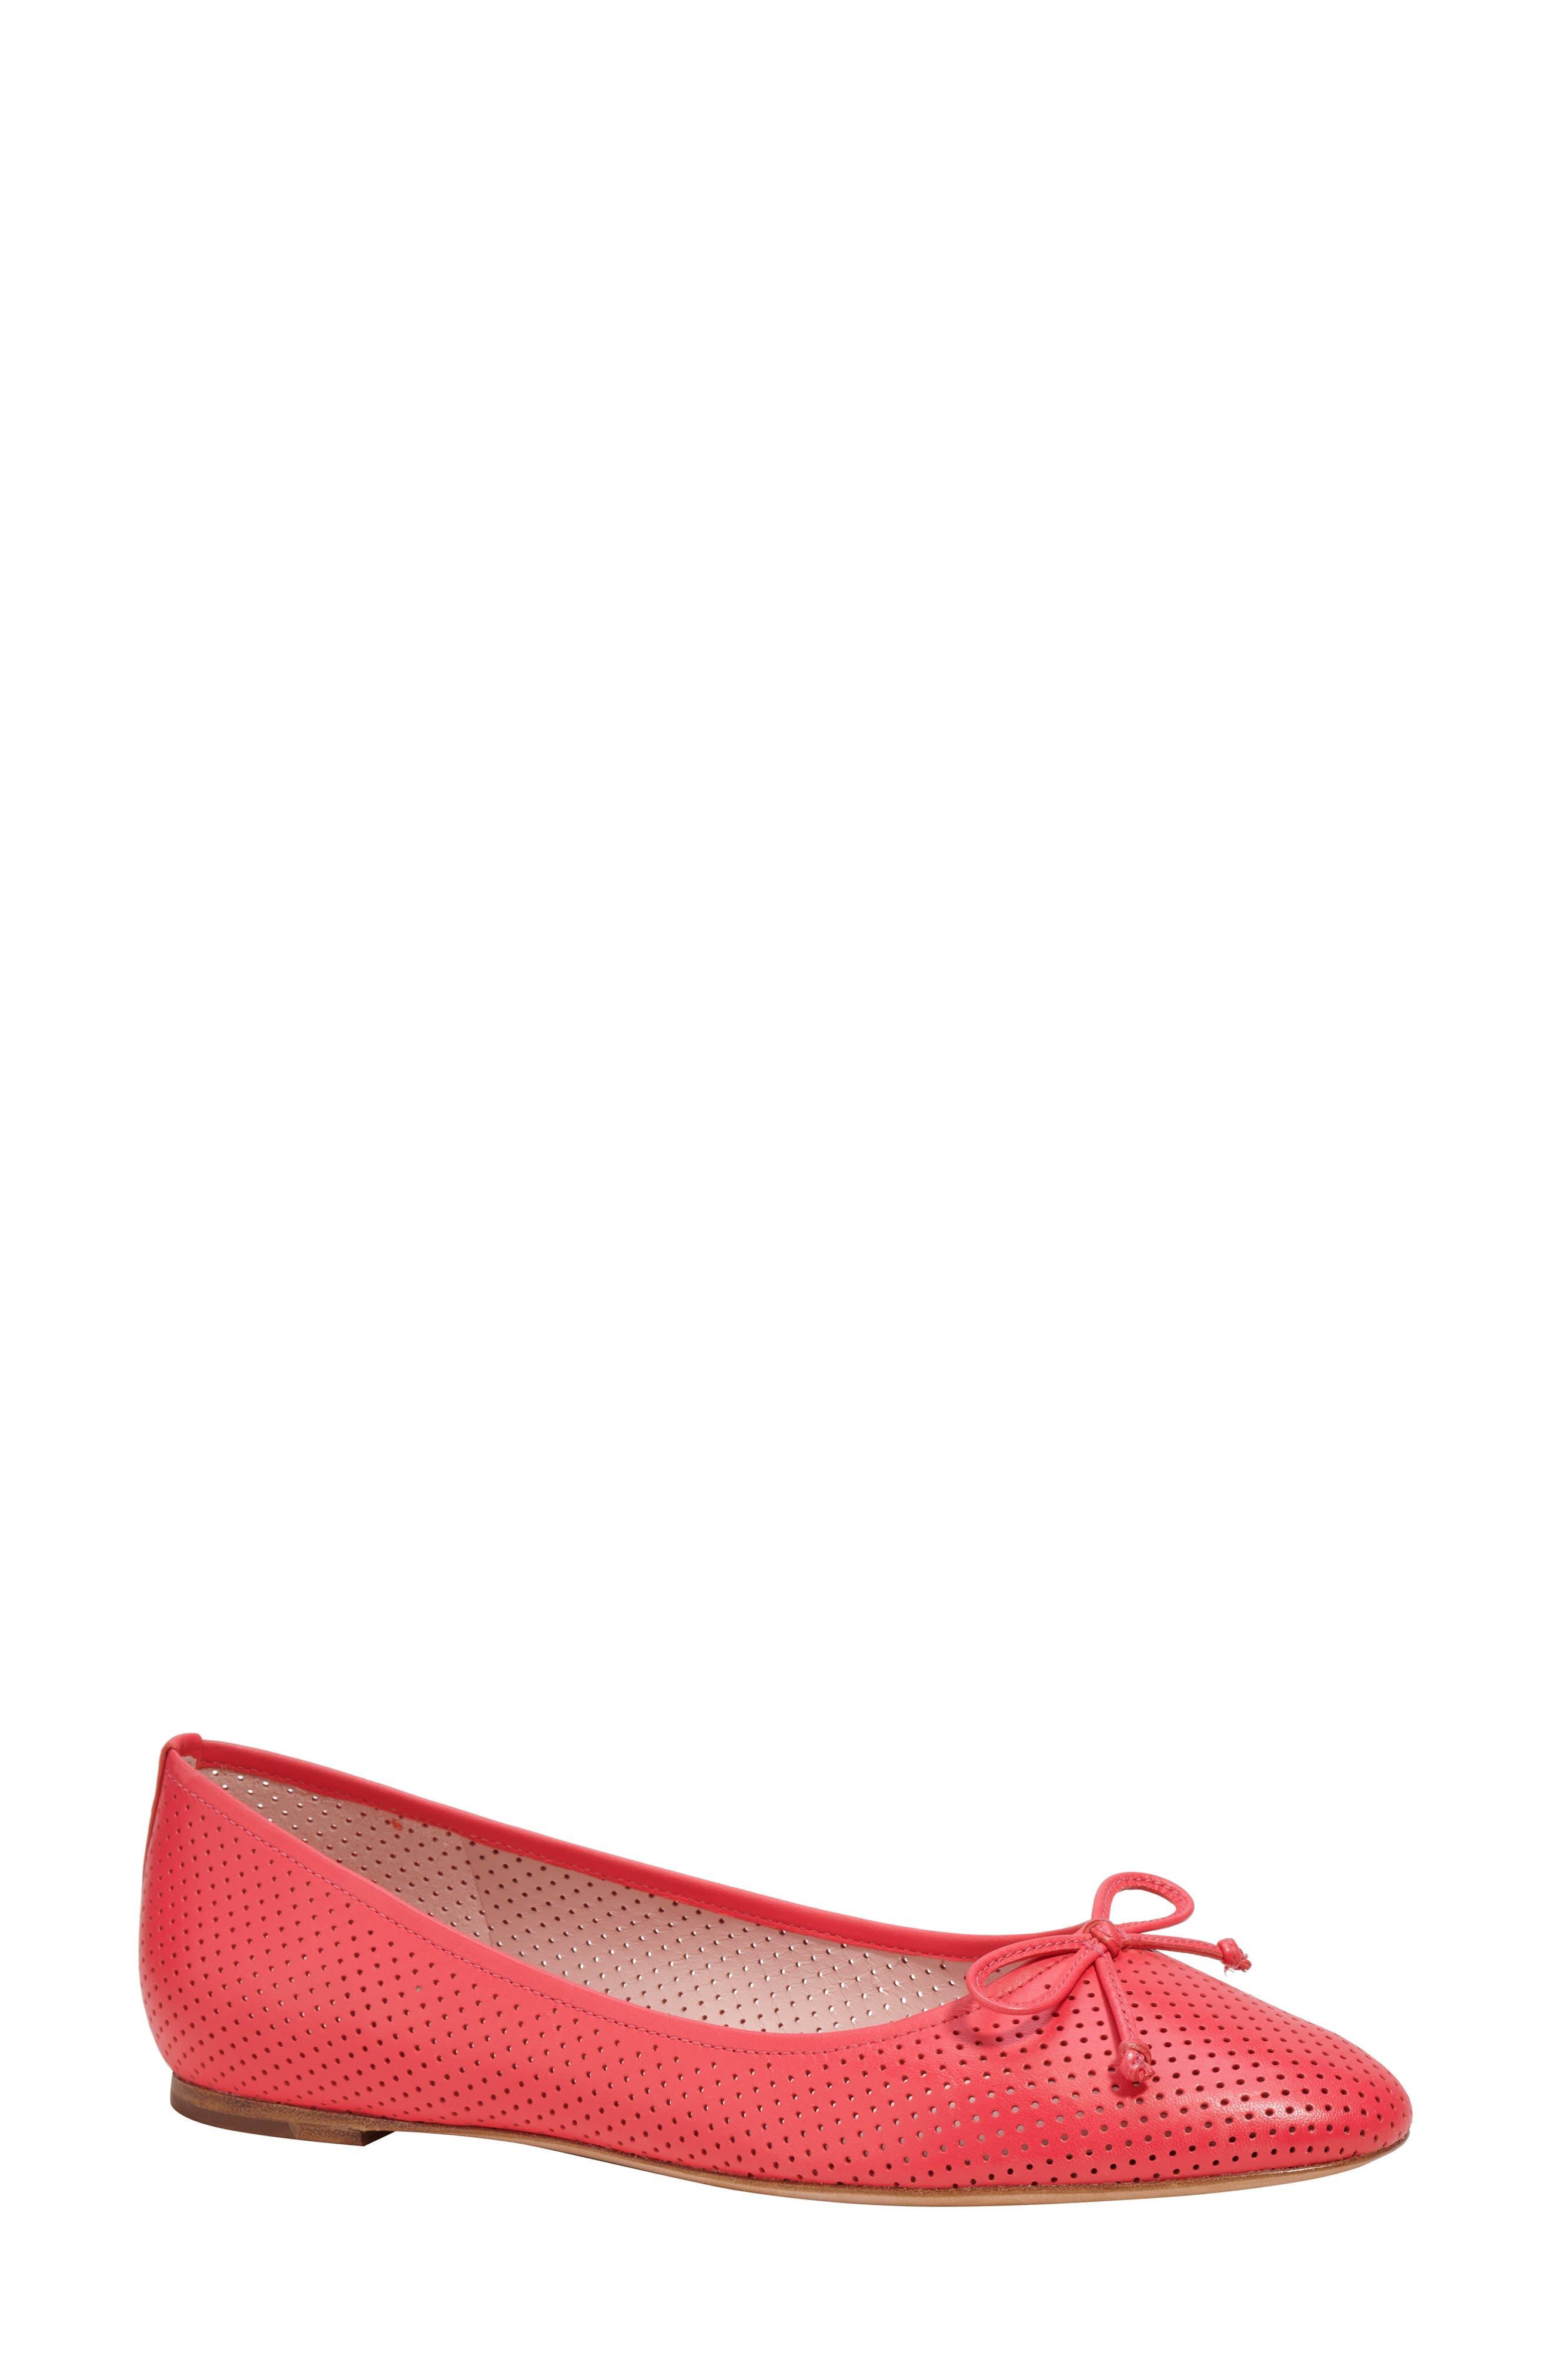 Kate Spade Veronica Ballet Flat in Red | Lyst